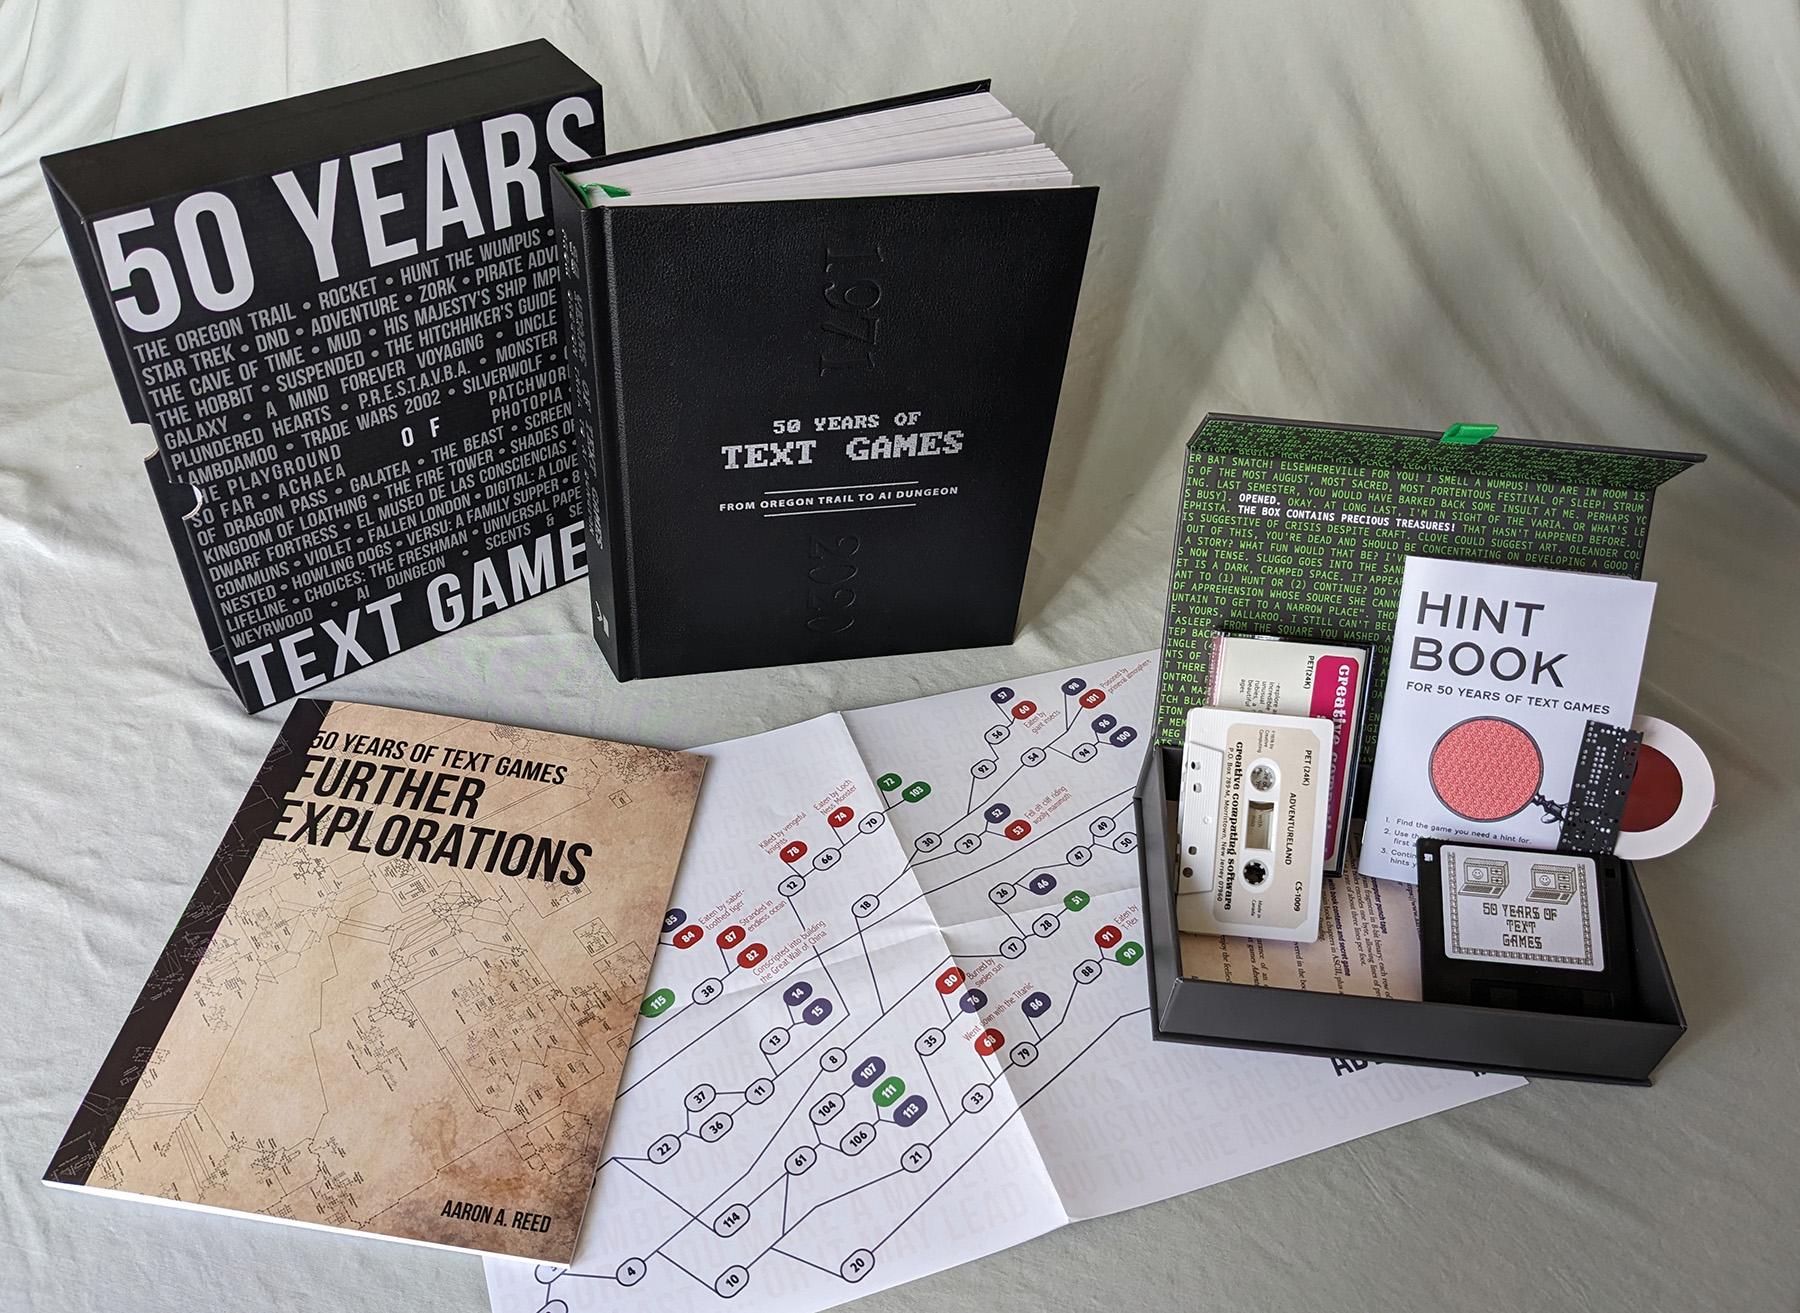 The full Ultimate Collector's Edition contents, spread out, including the slipcased hardcover edition of 50 Years of Text Games, the bonus book Further Explorations, a map of choice points in the first Choose Your Own Adventure book, and the feelies box, containing a floppy disk, a hint book with secret decoder wand, a replica of the 1978 cassette tape release of Adventureland and Pirate Adventure, and a strip of 1970s computer punch tape.